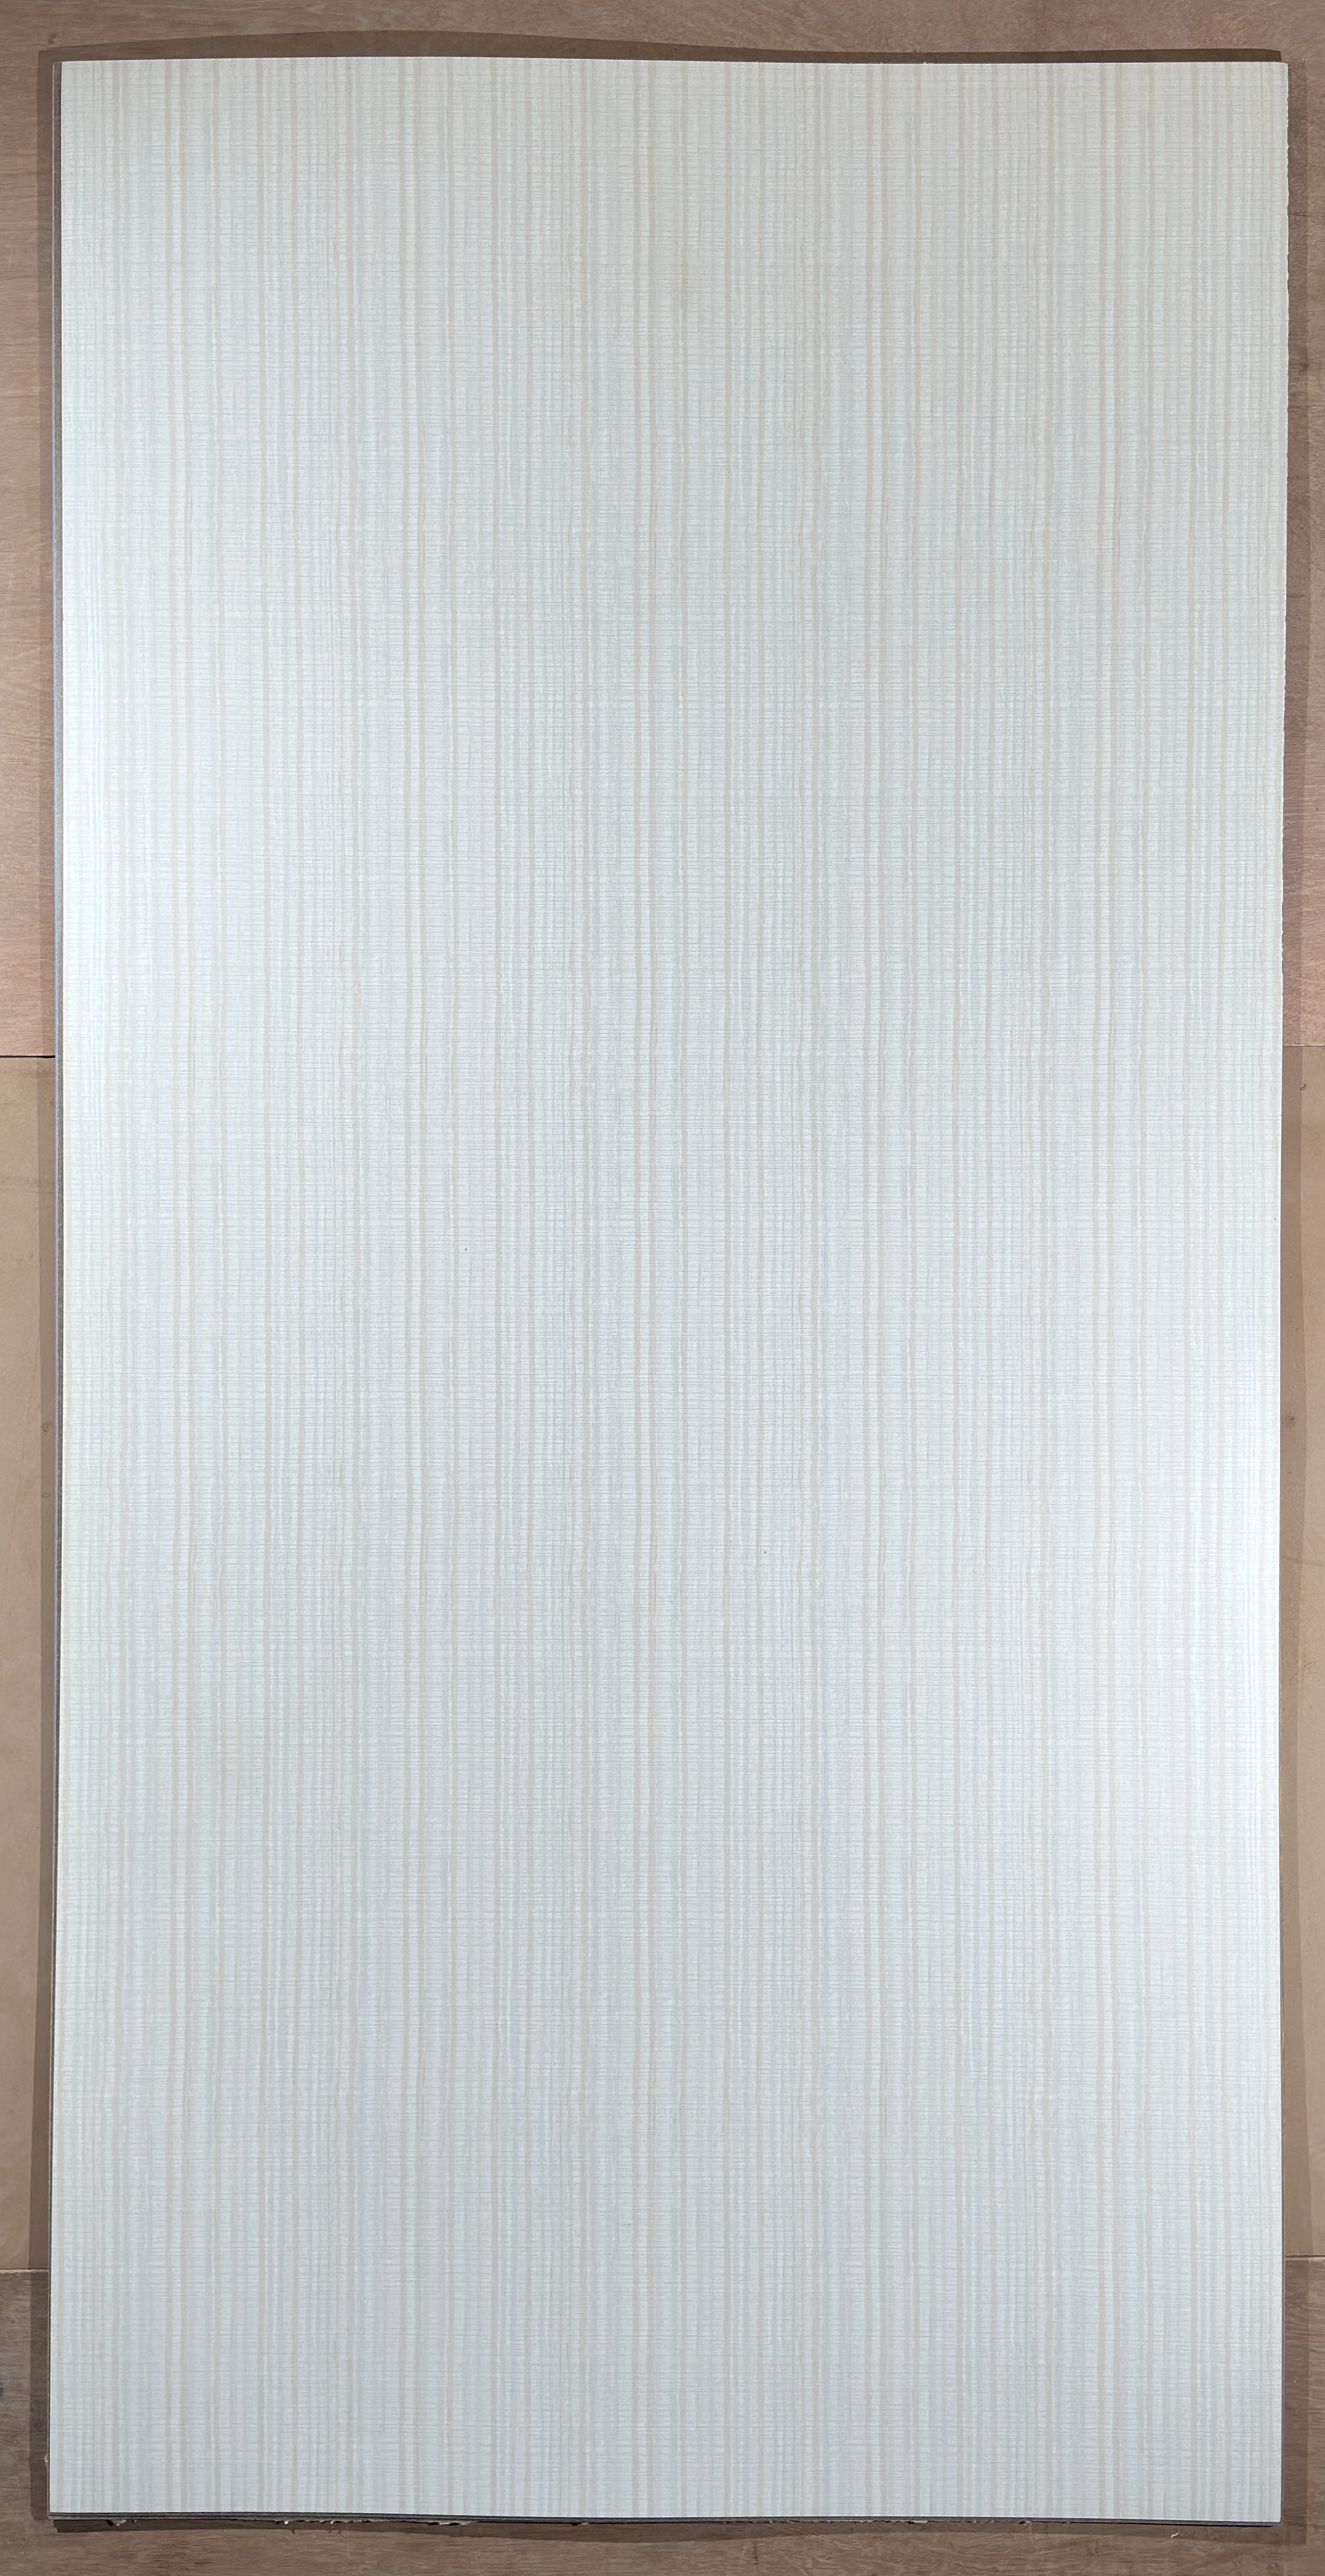 87002 SF White Decorative Laminate of 1 mm with a Suede finish available for sale at Material Depot in Bangalore